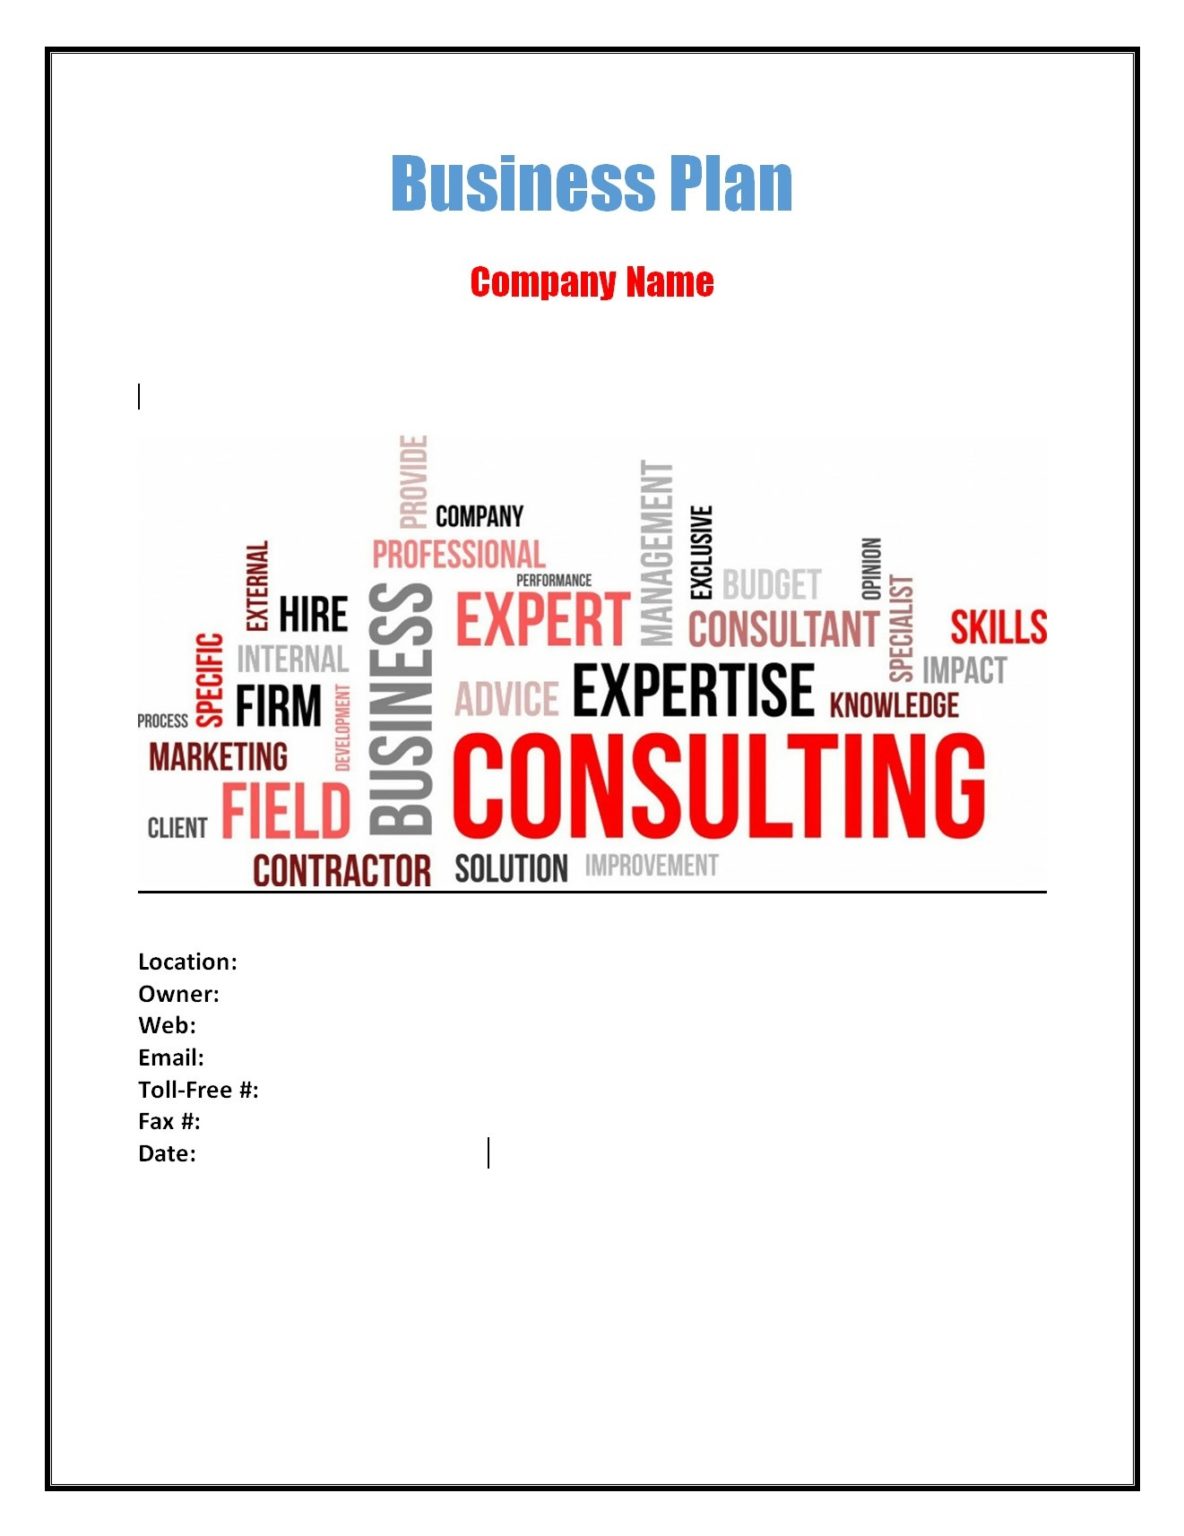 example of a business plan for consulting firm